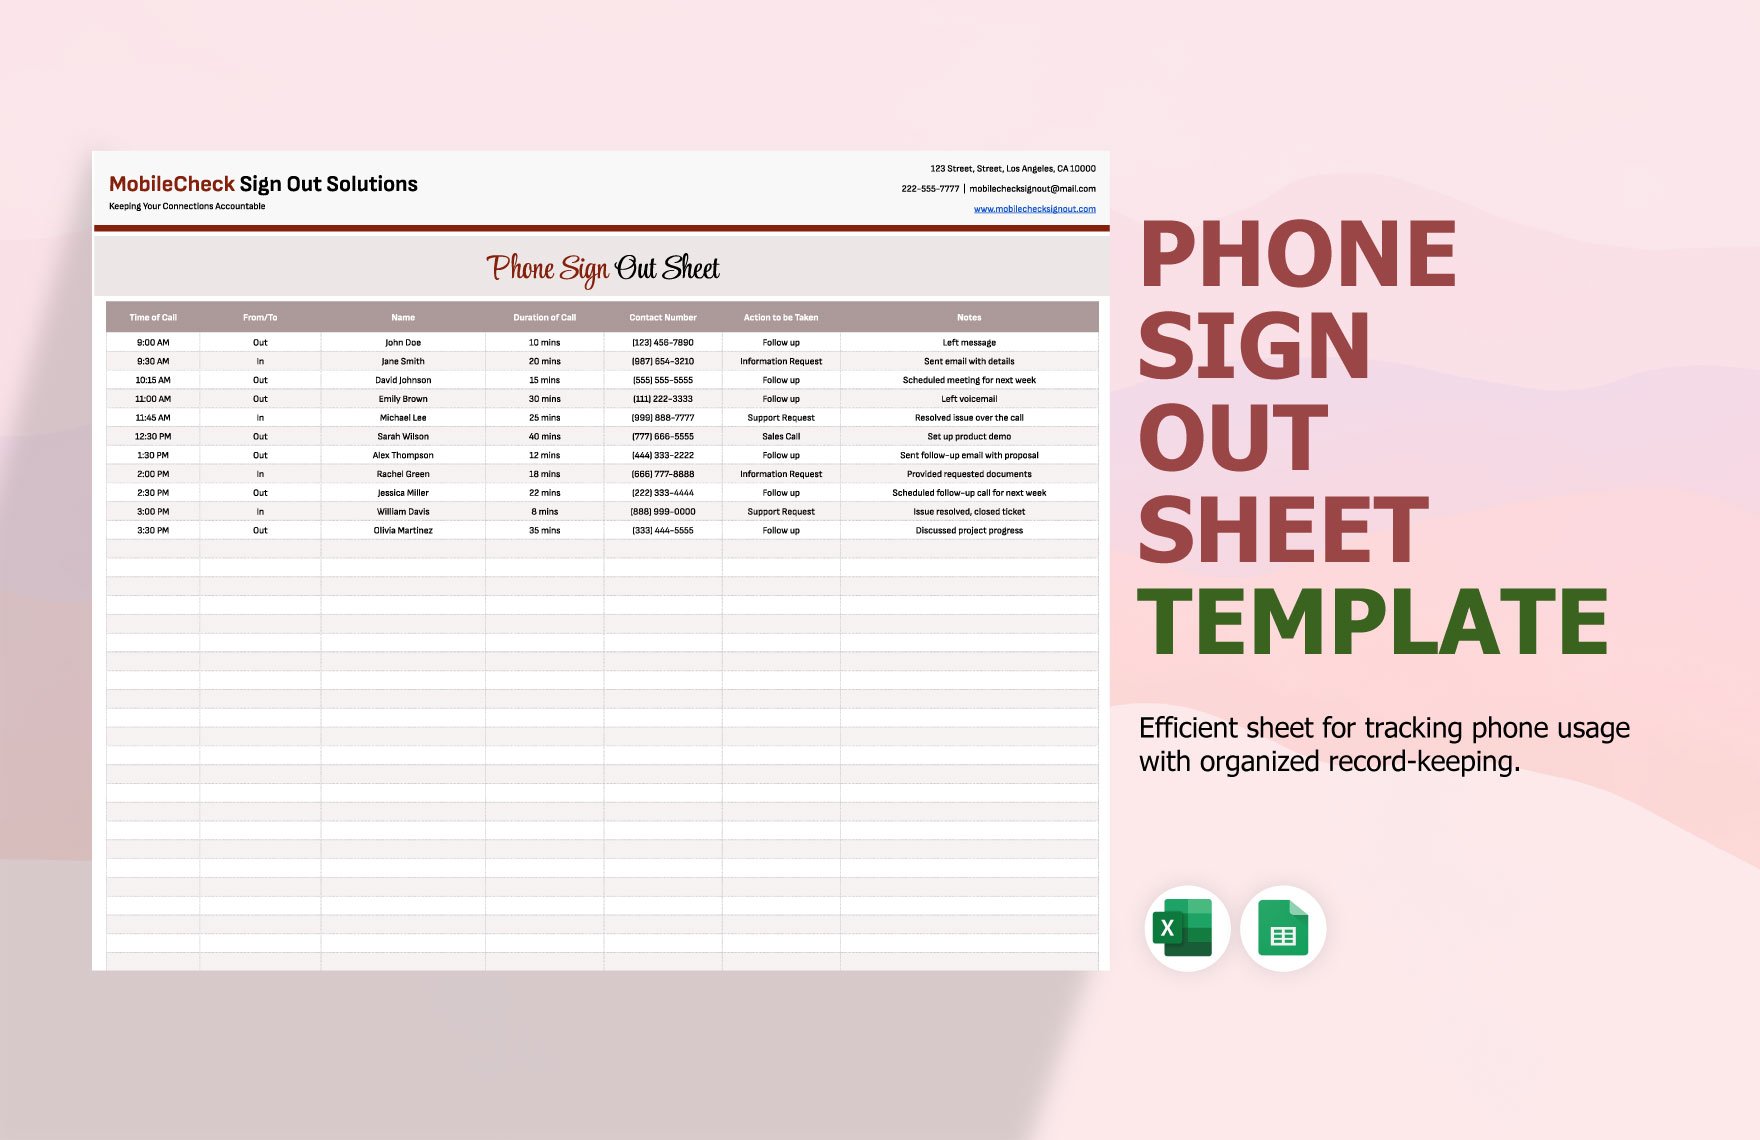 Phone Sign Out Sheet Template in Excel, Google Sheets